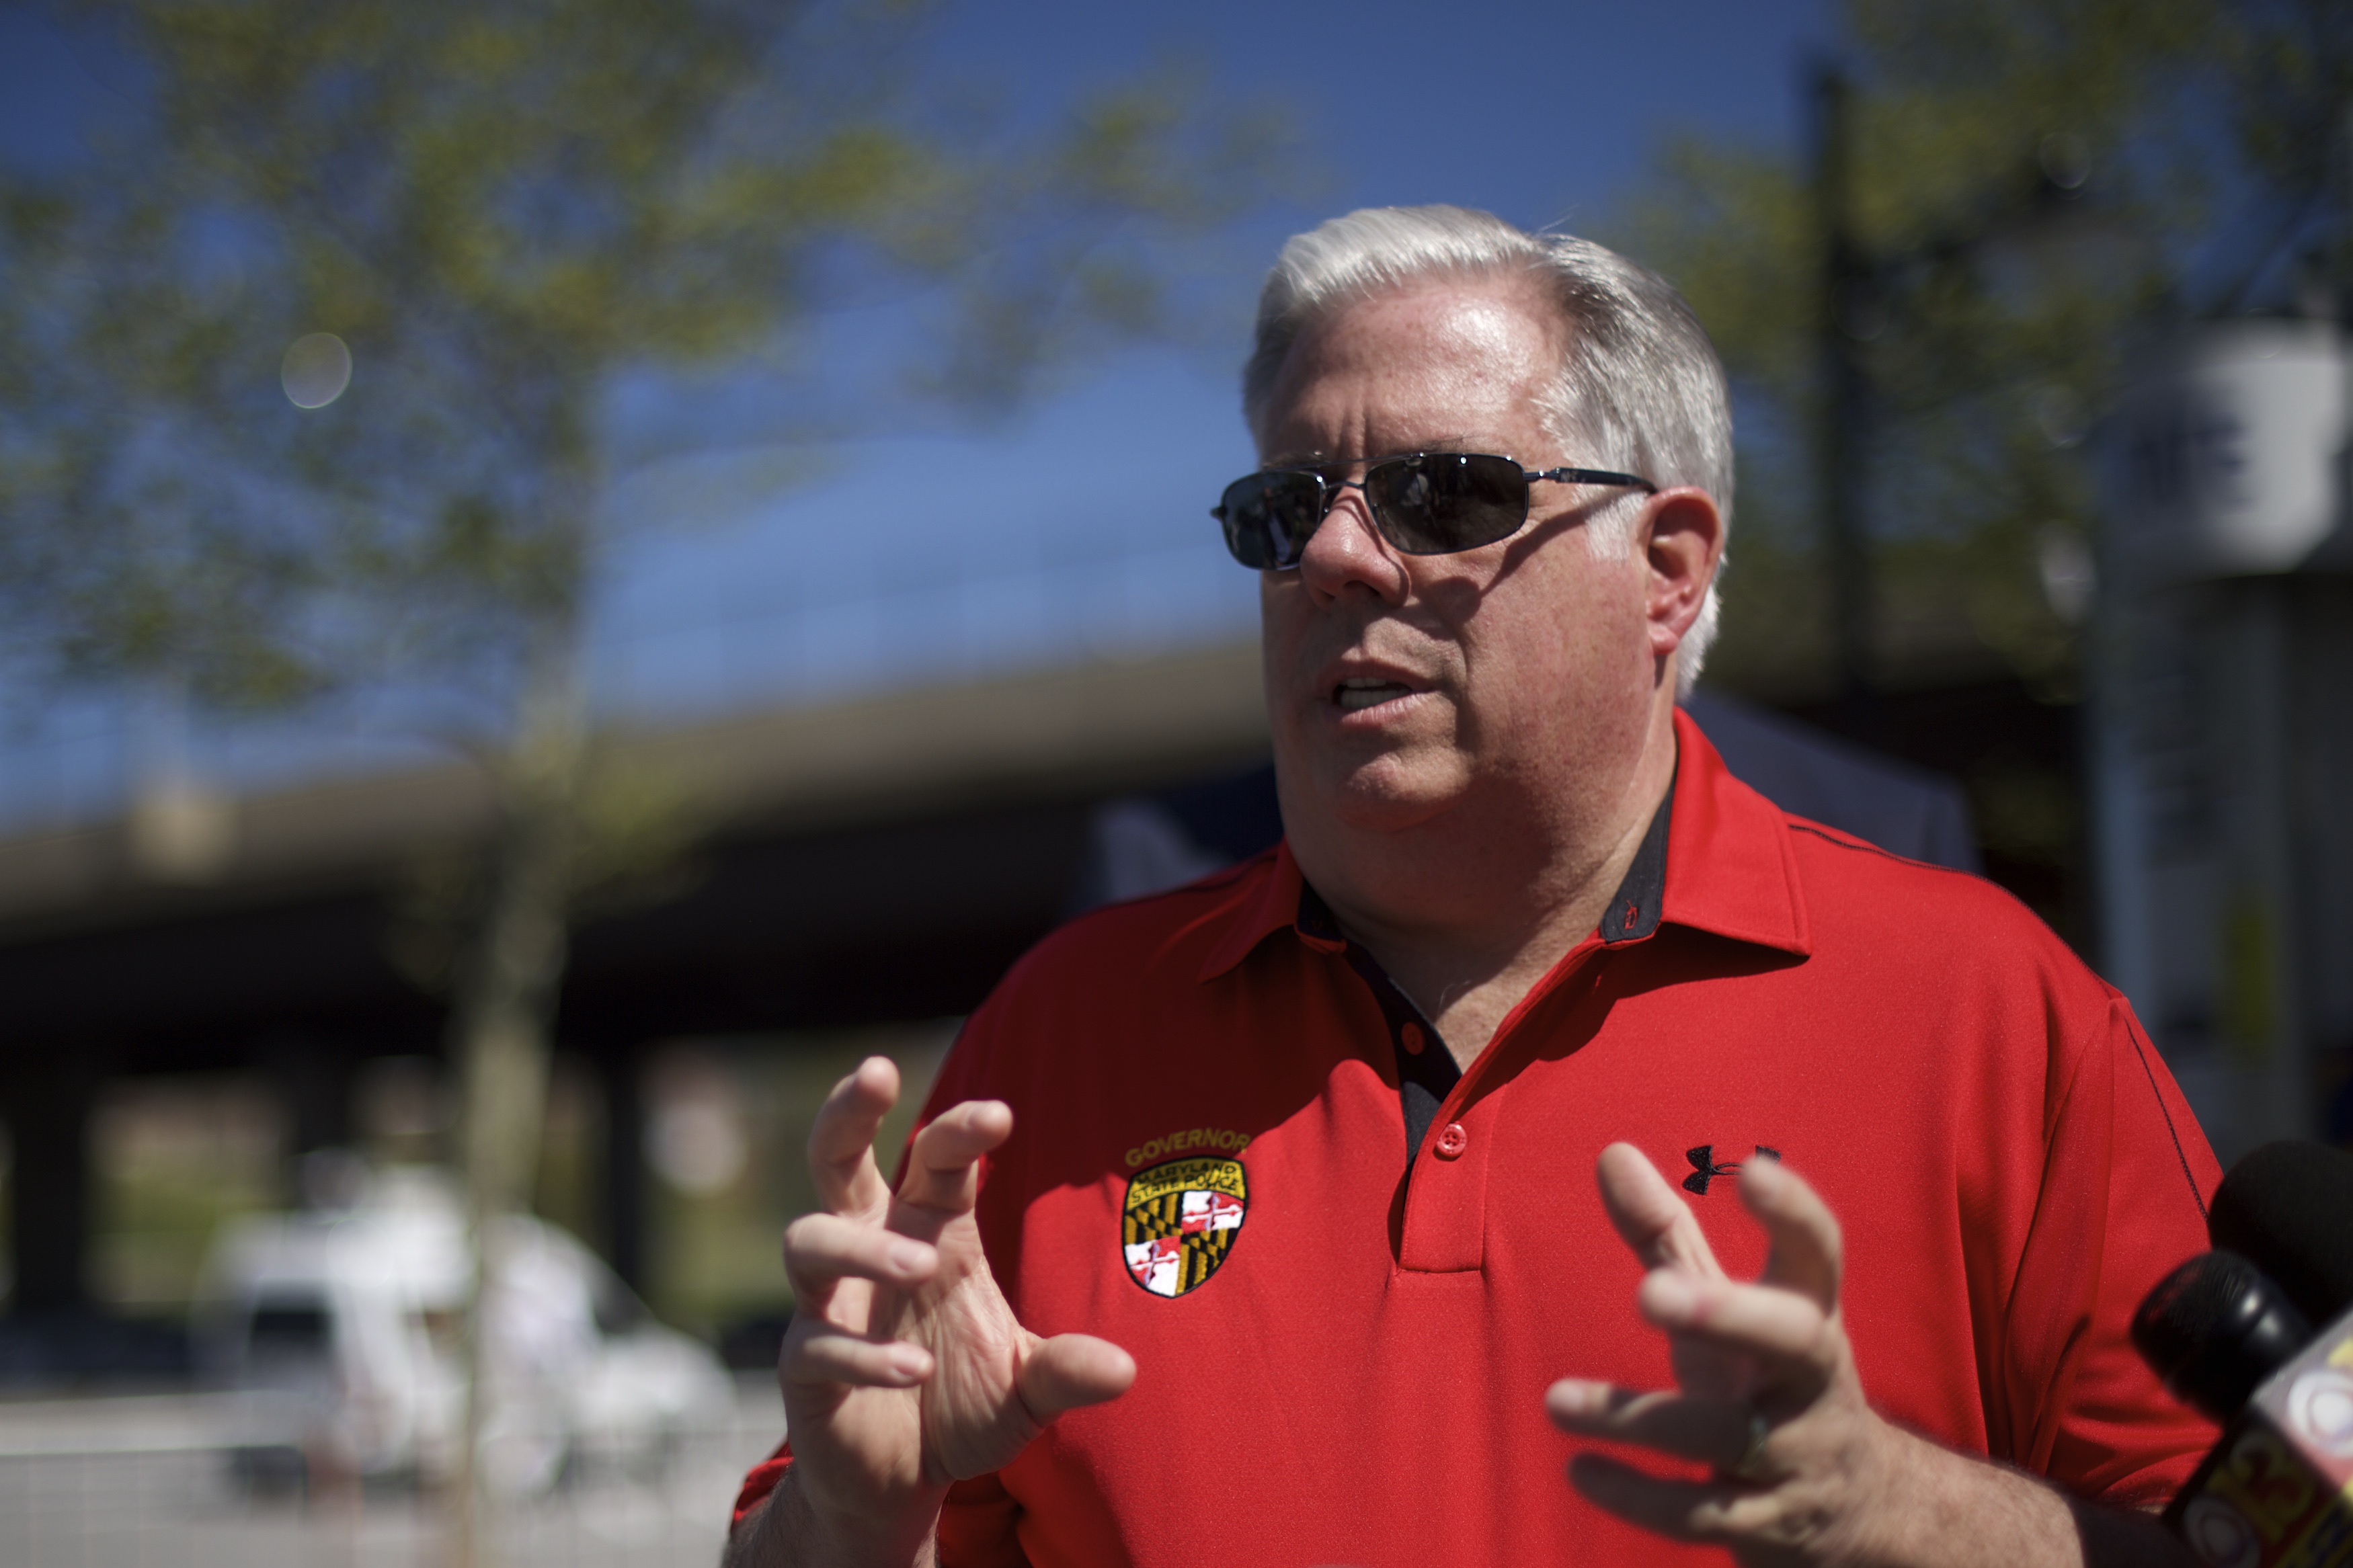 Governor Larry Hogan speaks to the media after the unrest in Baltimore. (Getty)